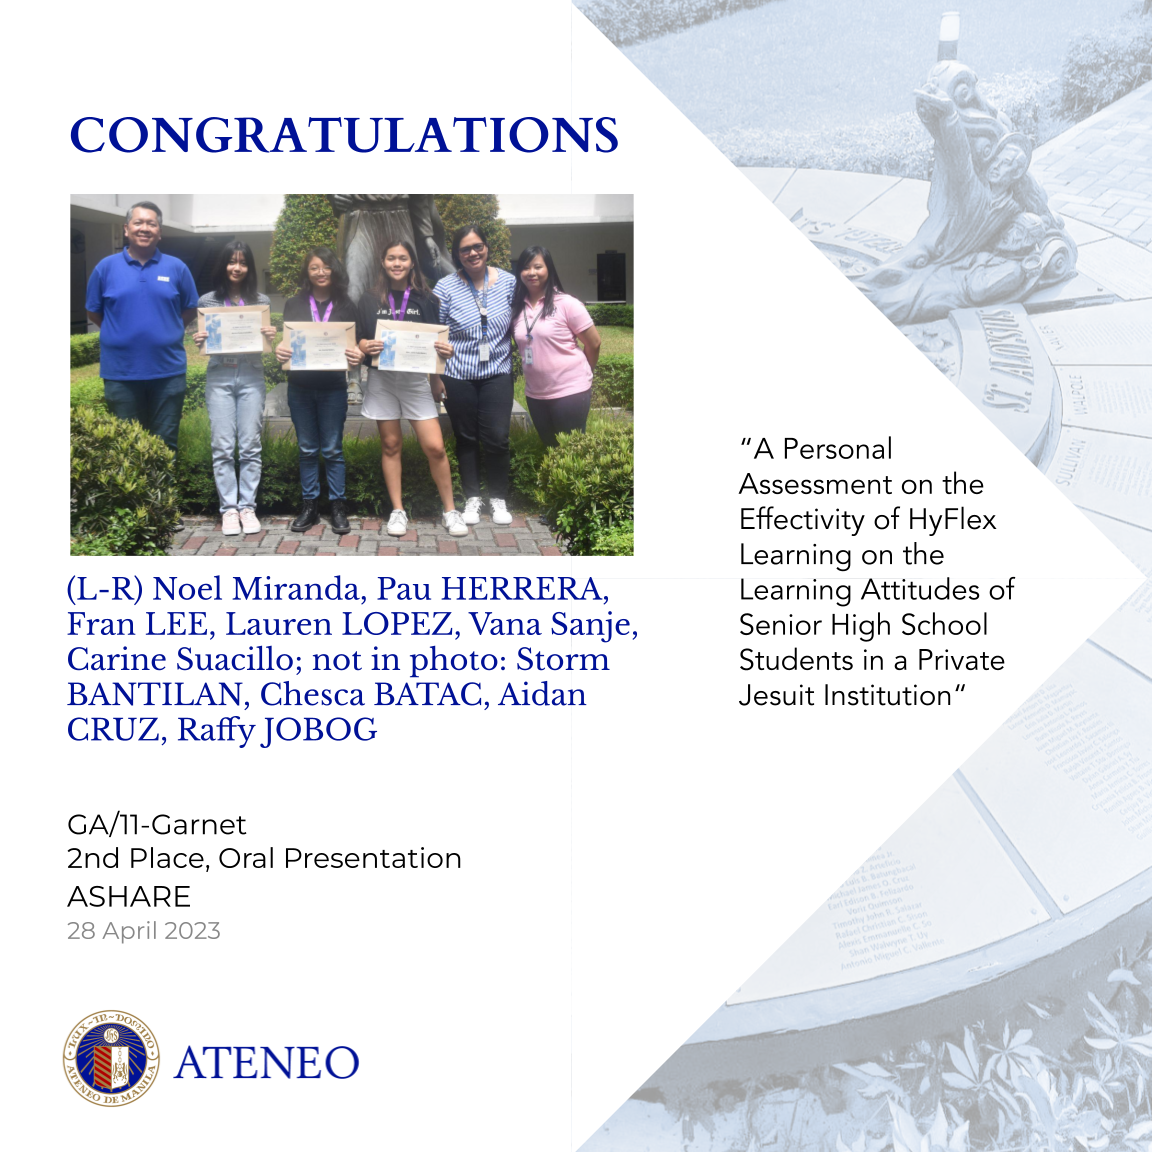 5)	"A Personal Assessment on the Effectivity of HyFlex Learning on the Learning Attitudes of Senior High School Students in a Private Jesuit Institution" by Bantilan, Batac, Cruz, Herrera, Jobog, Lee, and Lopez